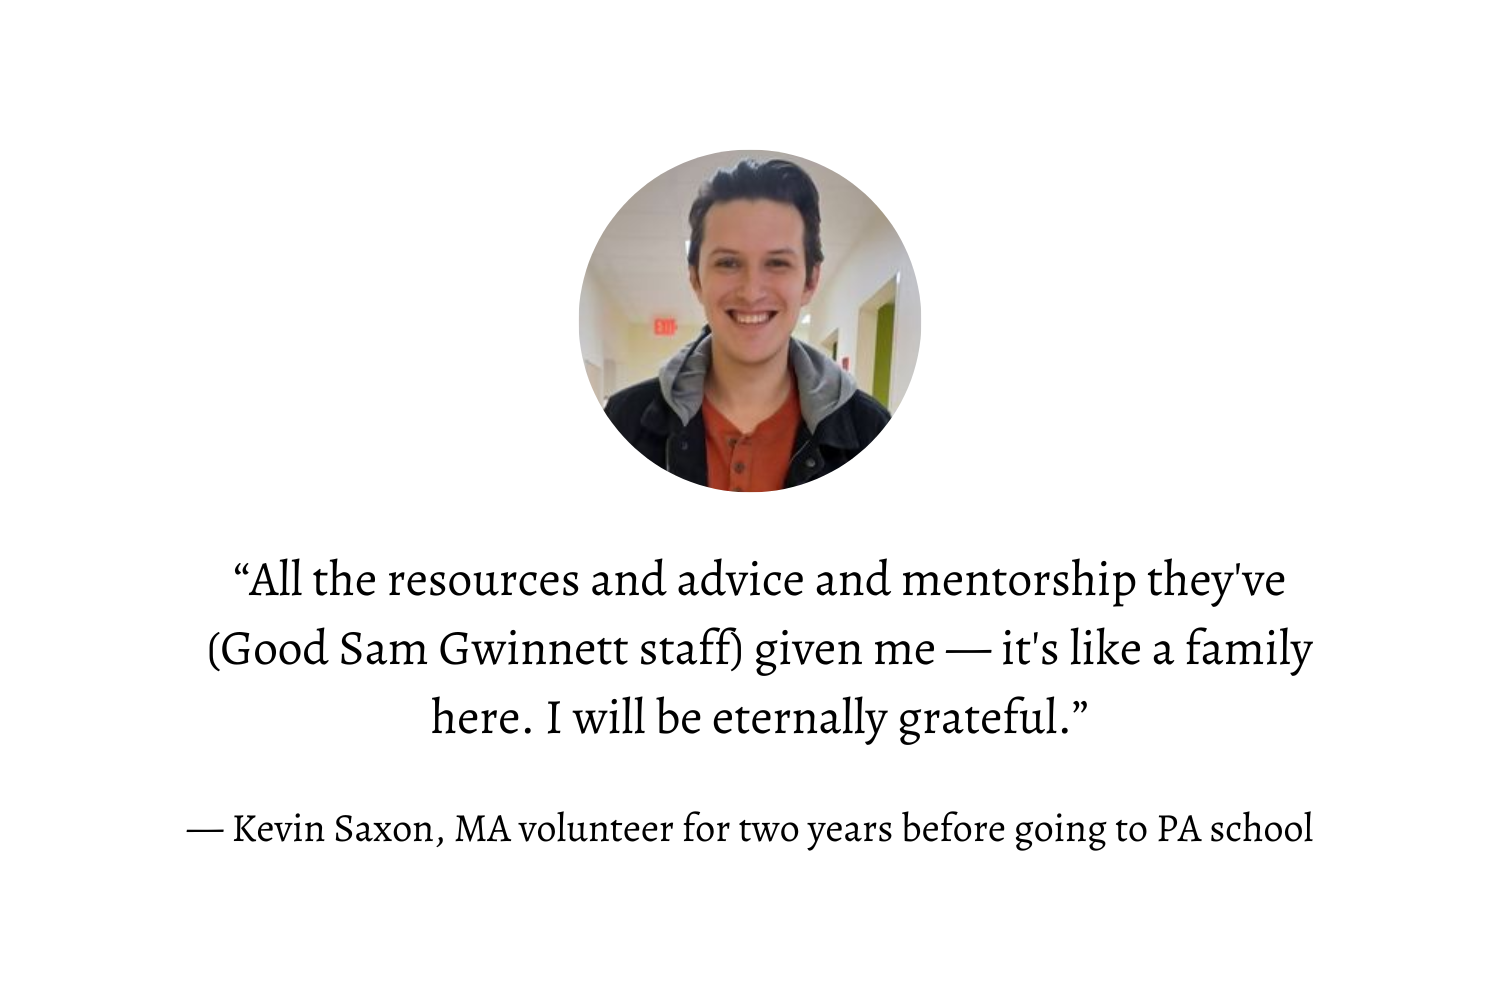 “All the resources and advice and mentorship they've (Good Sam Gwinnett staff) given me — it's like a family here. I will be eternally grateful.” — Kevin Saxon, MA Volunteer for two years before going to PA school